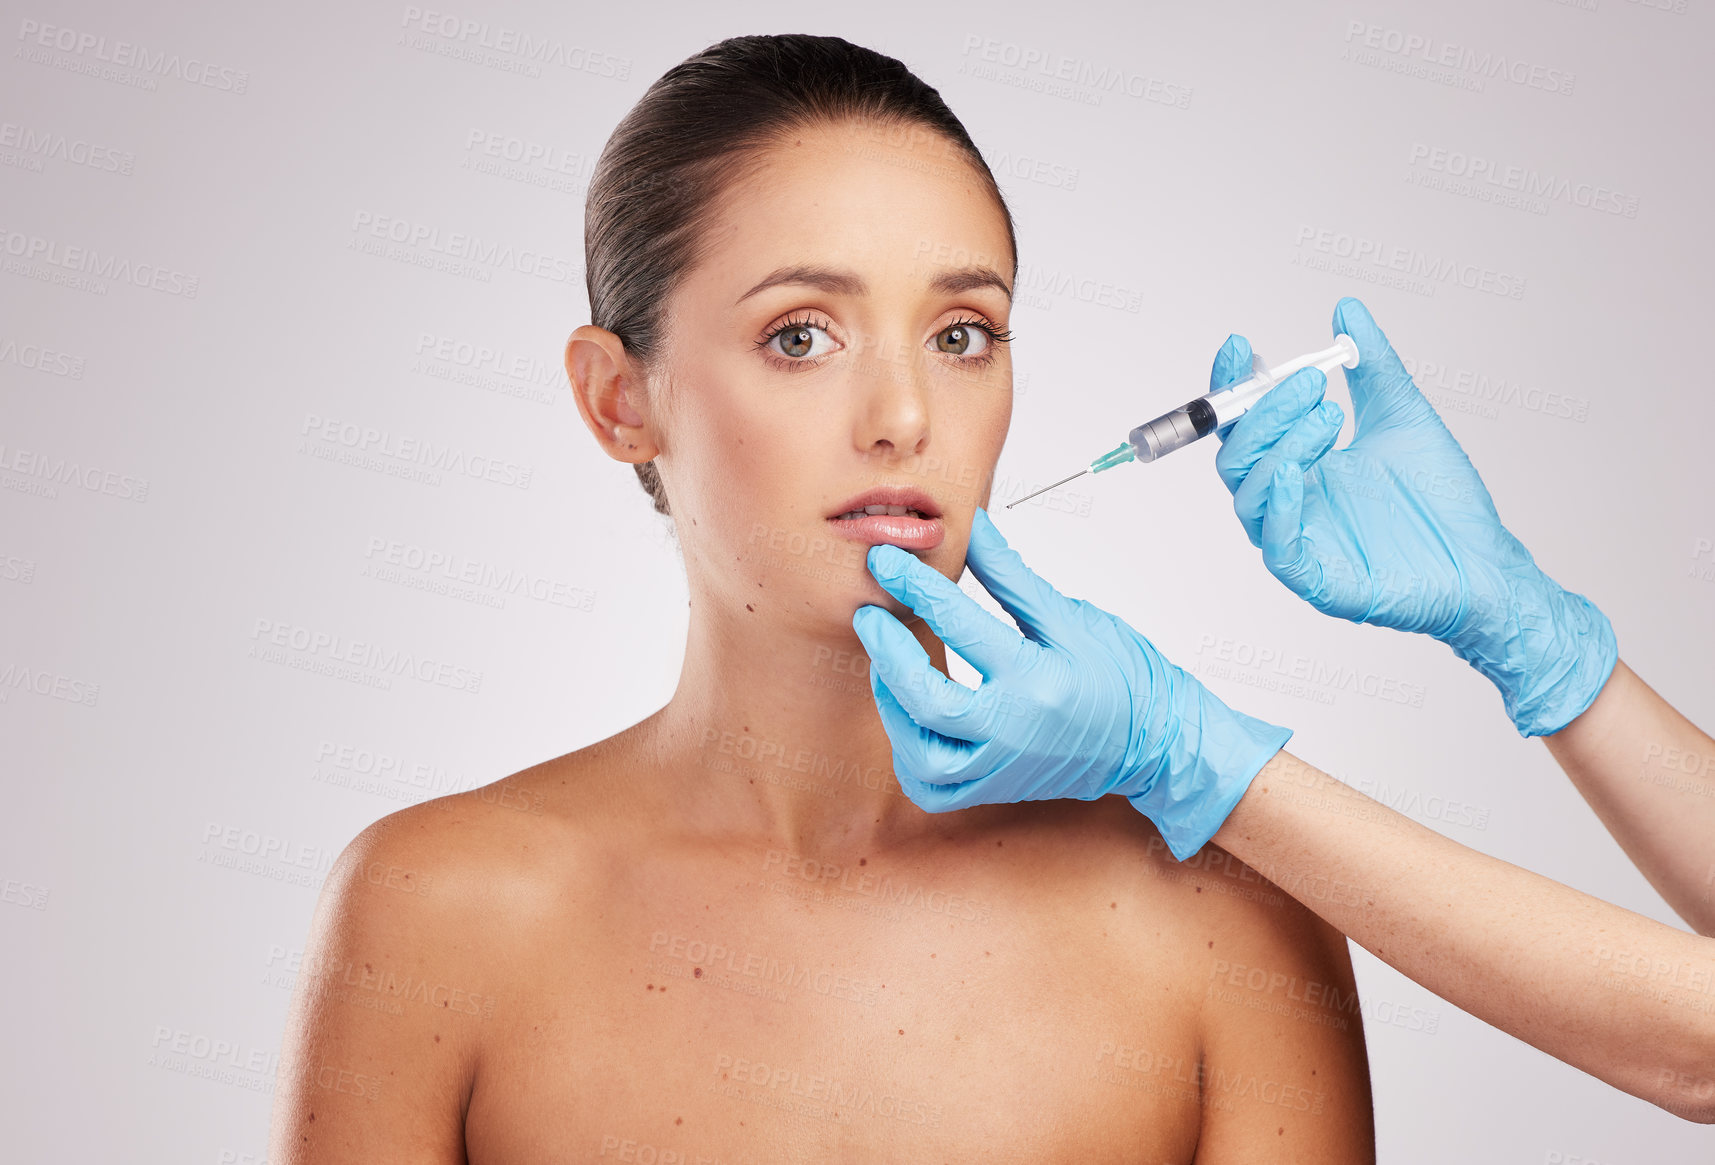 Buy stock photo Shot of an attractive young woman getting her face injected by gloved hands against a studio background